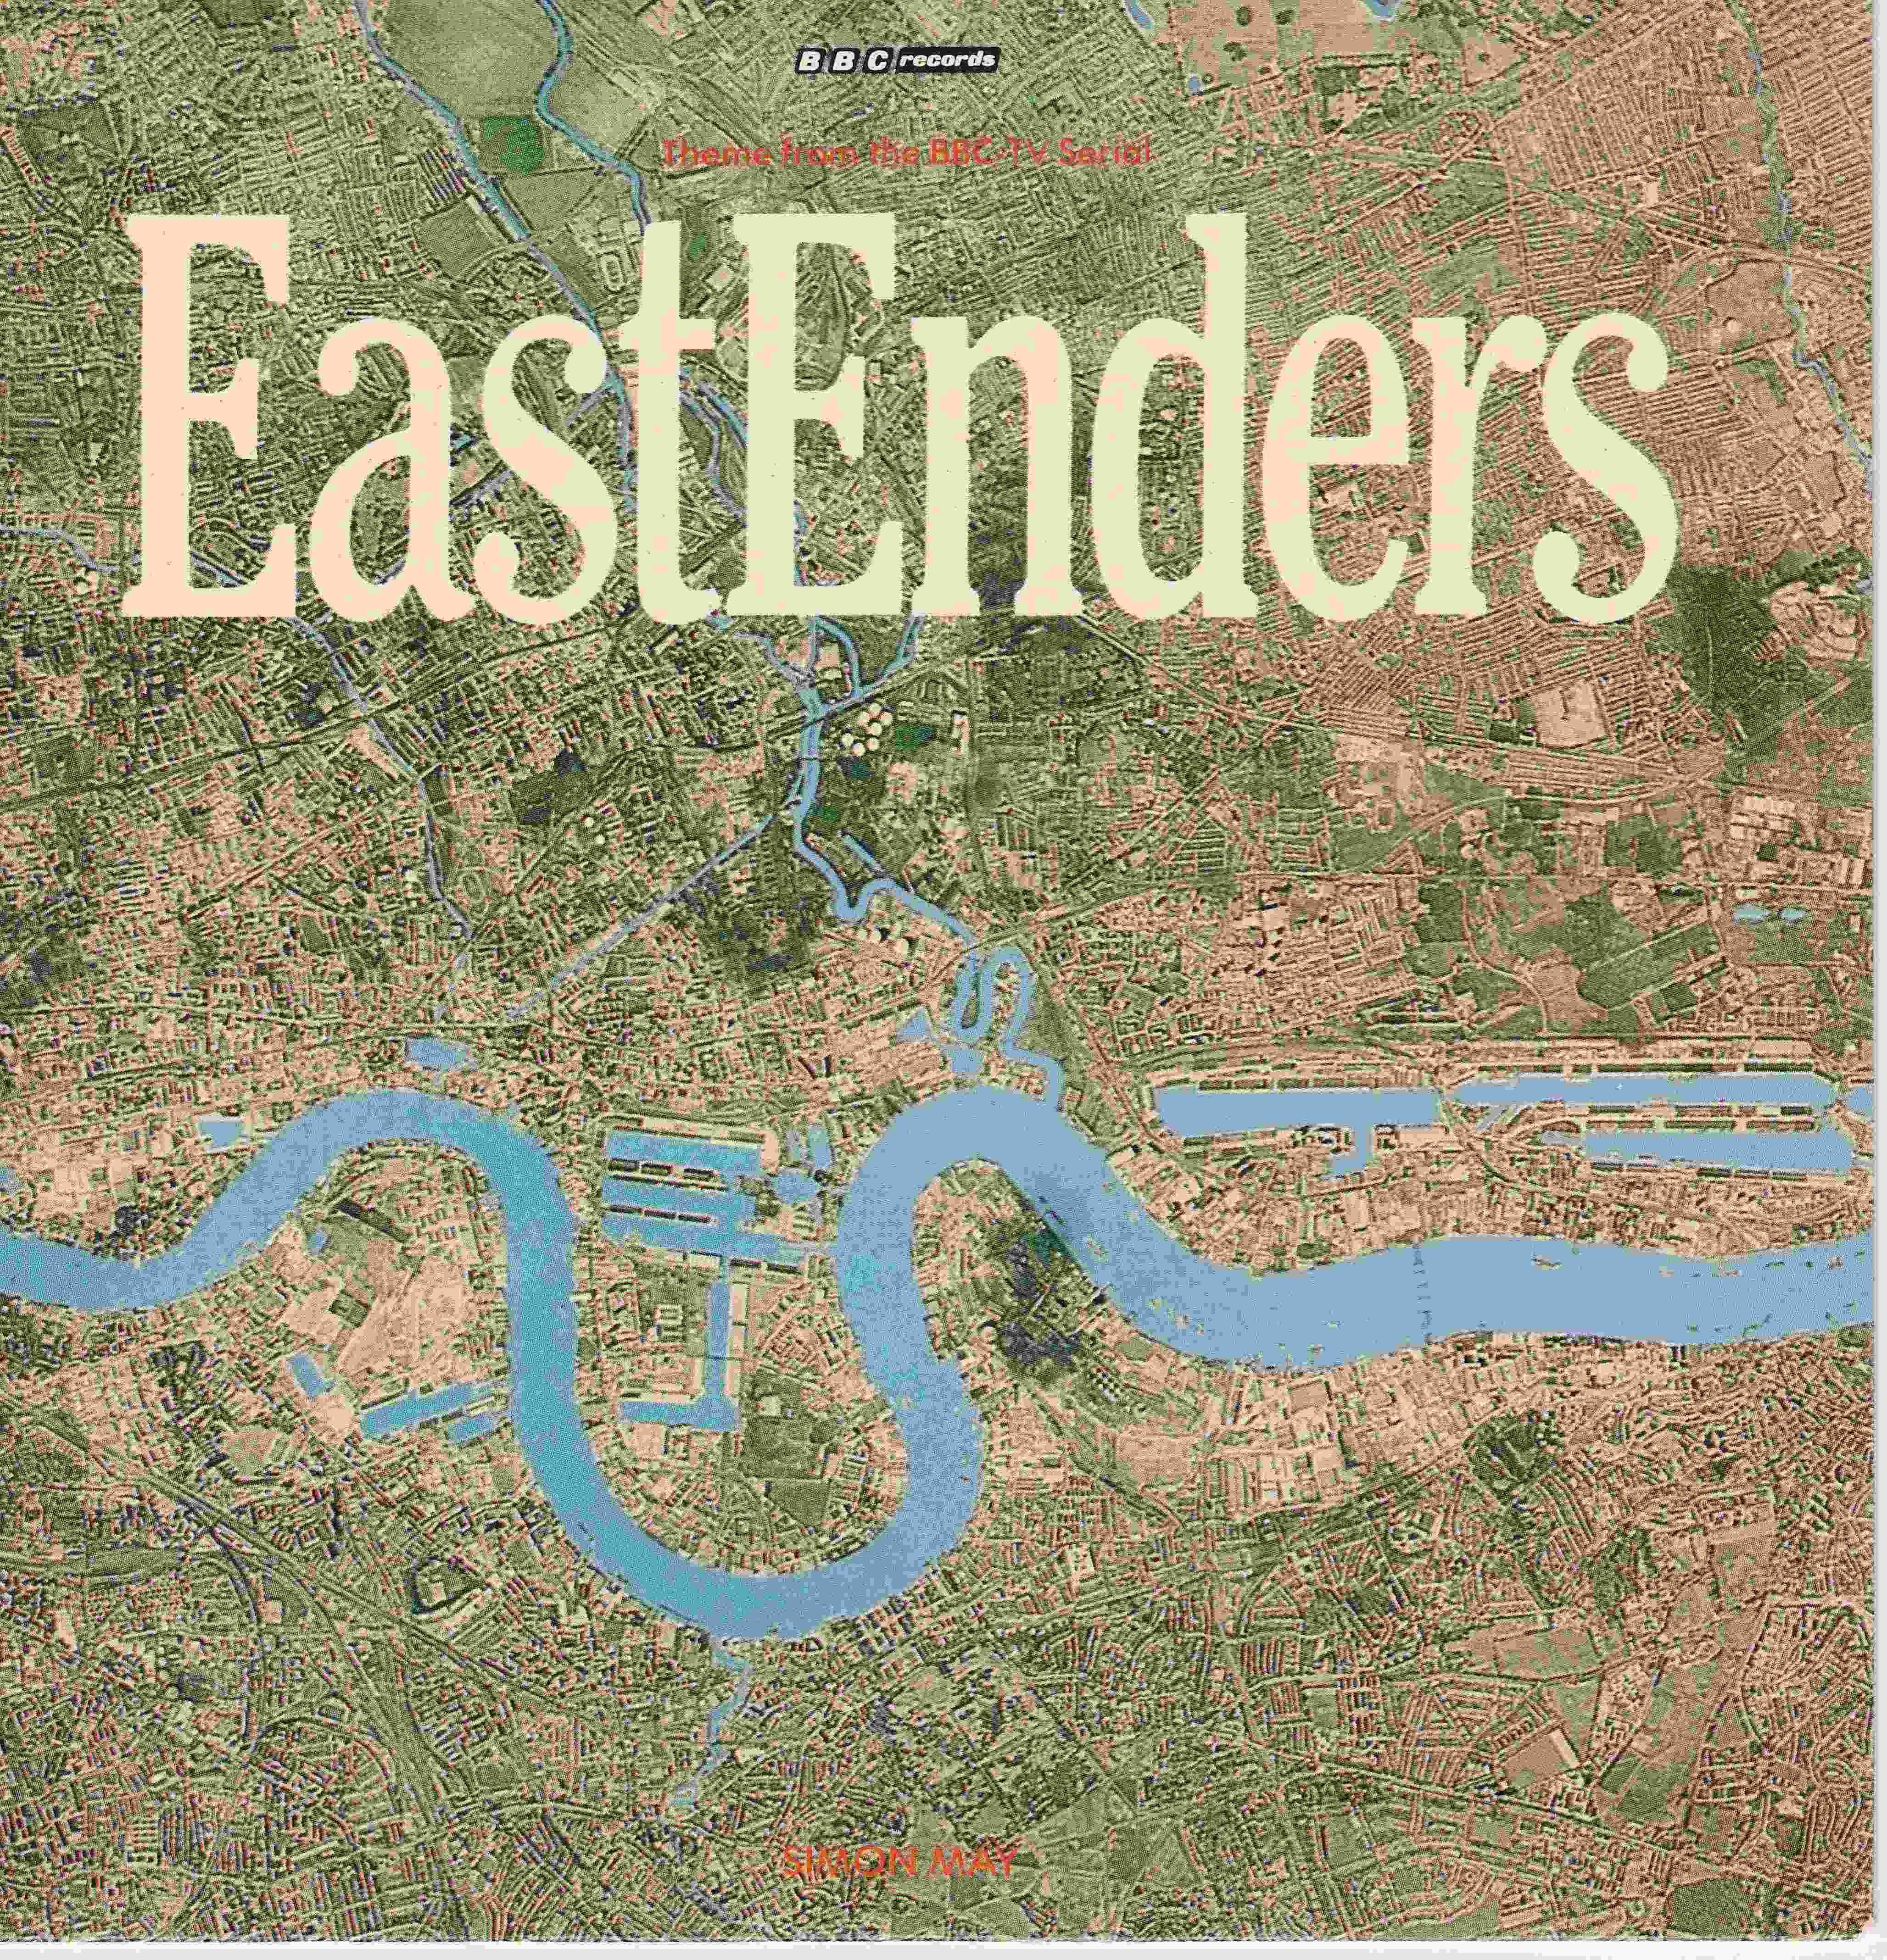 Picture of RESL 160 EastEnders by artist Simon May from the BBC singles - Records and Tapes library